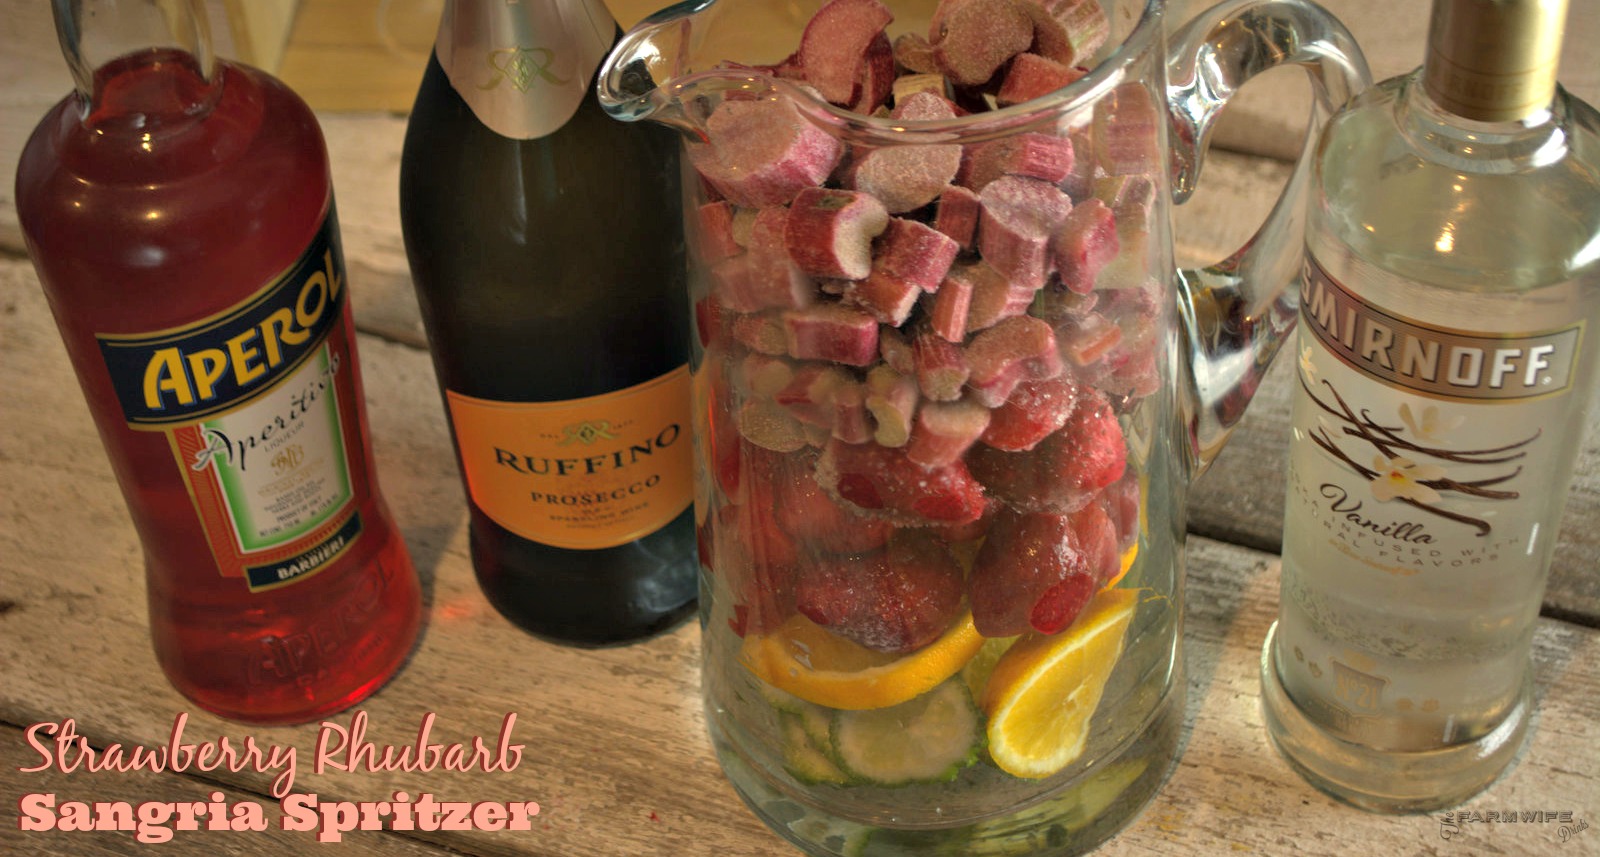 Strawberry Rhubarb Sangria Spritzer combines the summer flavors to make a flavorful sangria all year round thanks to frozen rhubarb and strawberries.